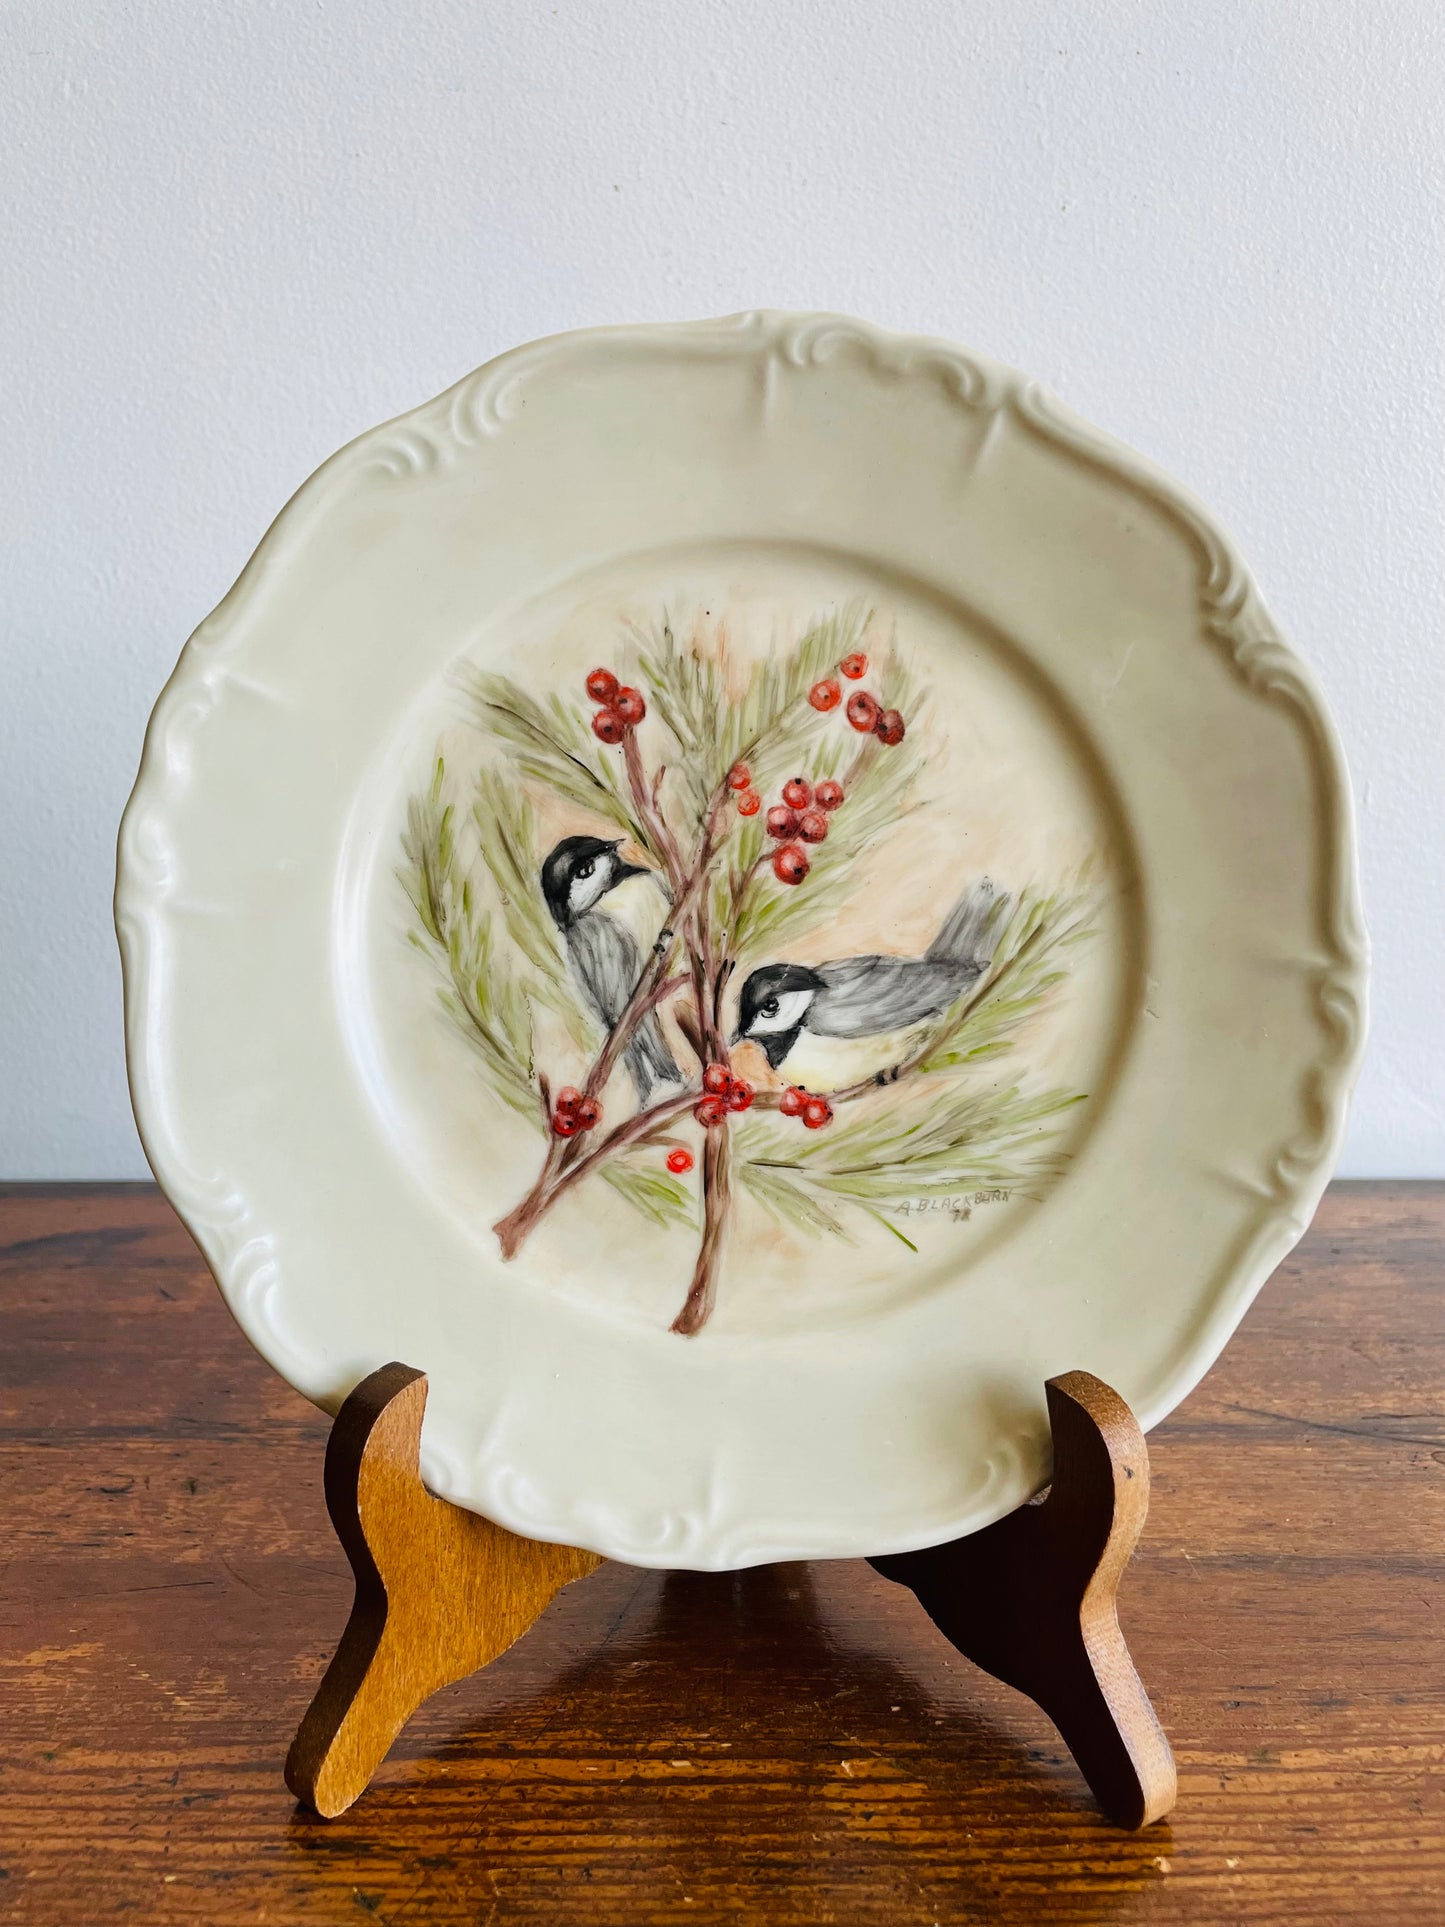 Edelstein Bavaria Maria-Theresia Germany Plate - Hand Painted with Chickadee Bird Winter Scene by A. Blackburn in 1978